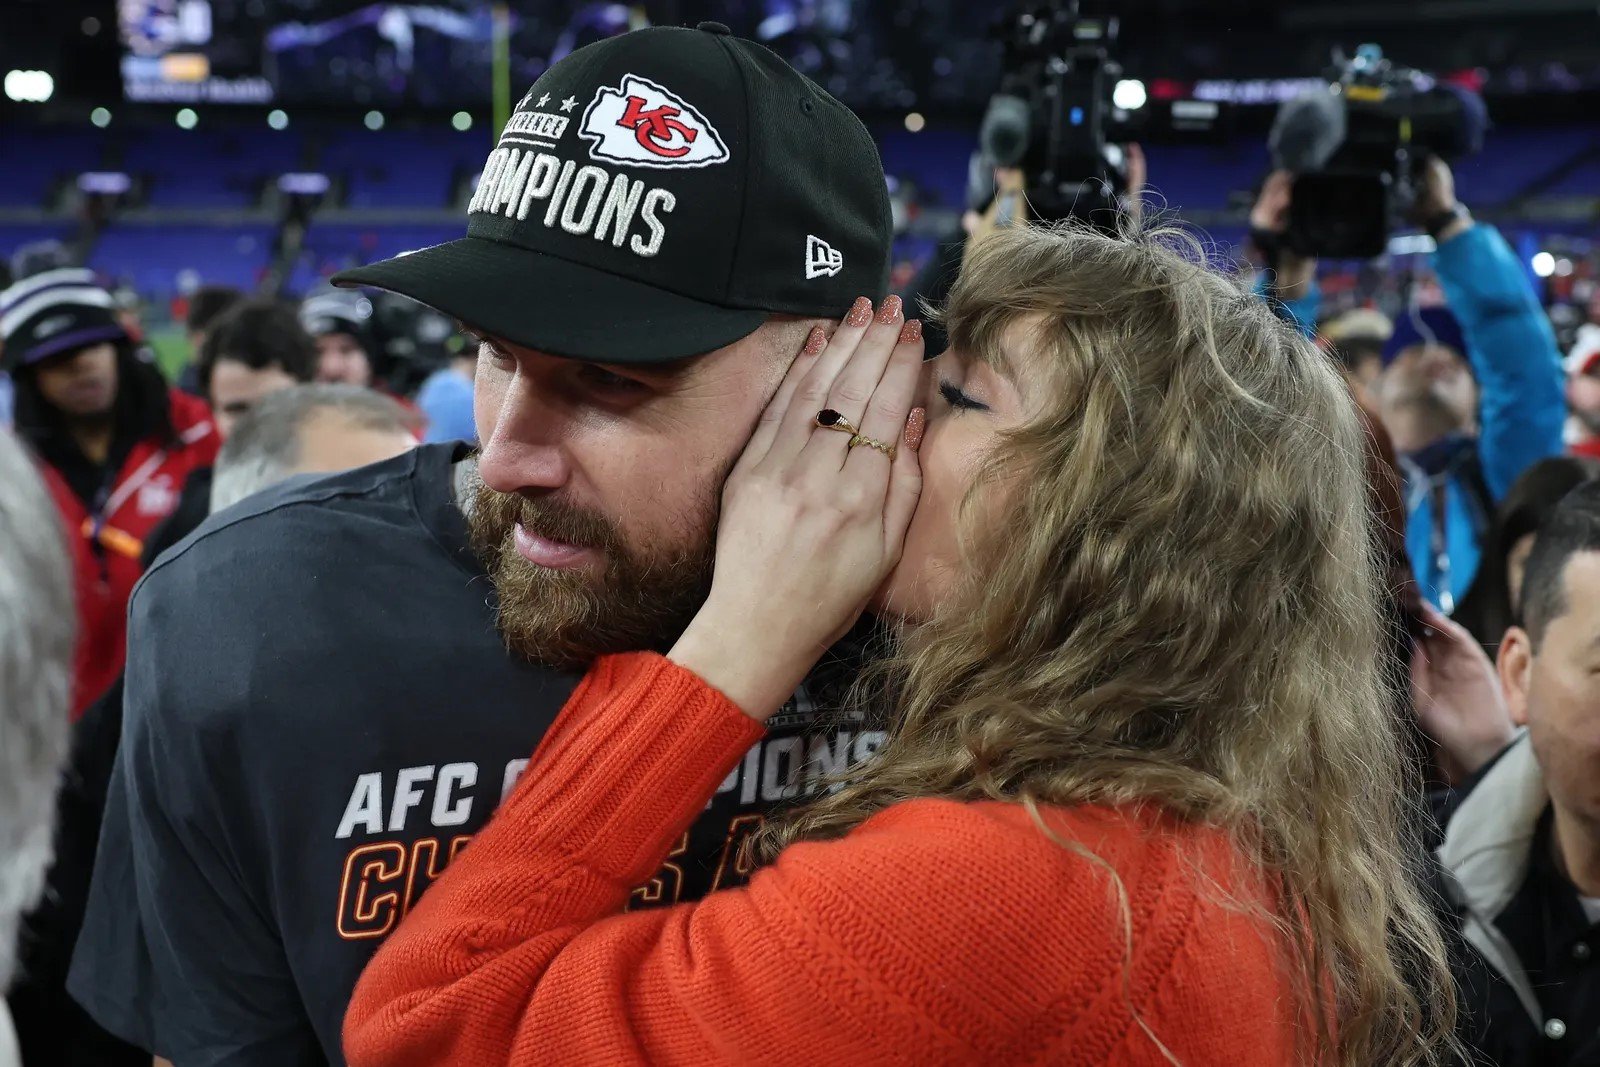 "I love it when Taylor comes and supports me and enjoys the game with the fam and friends" Travis Kelce Reveals